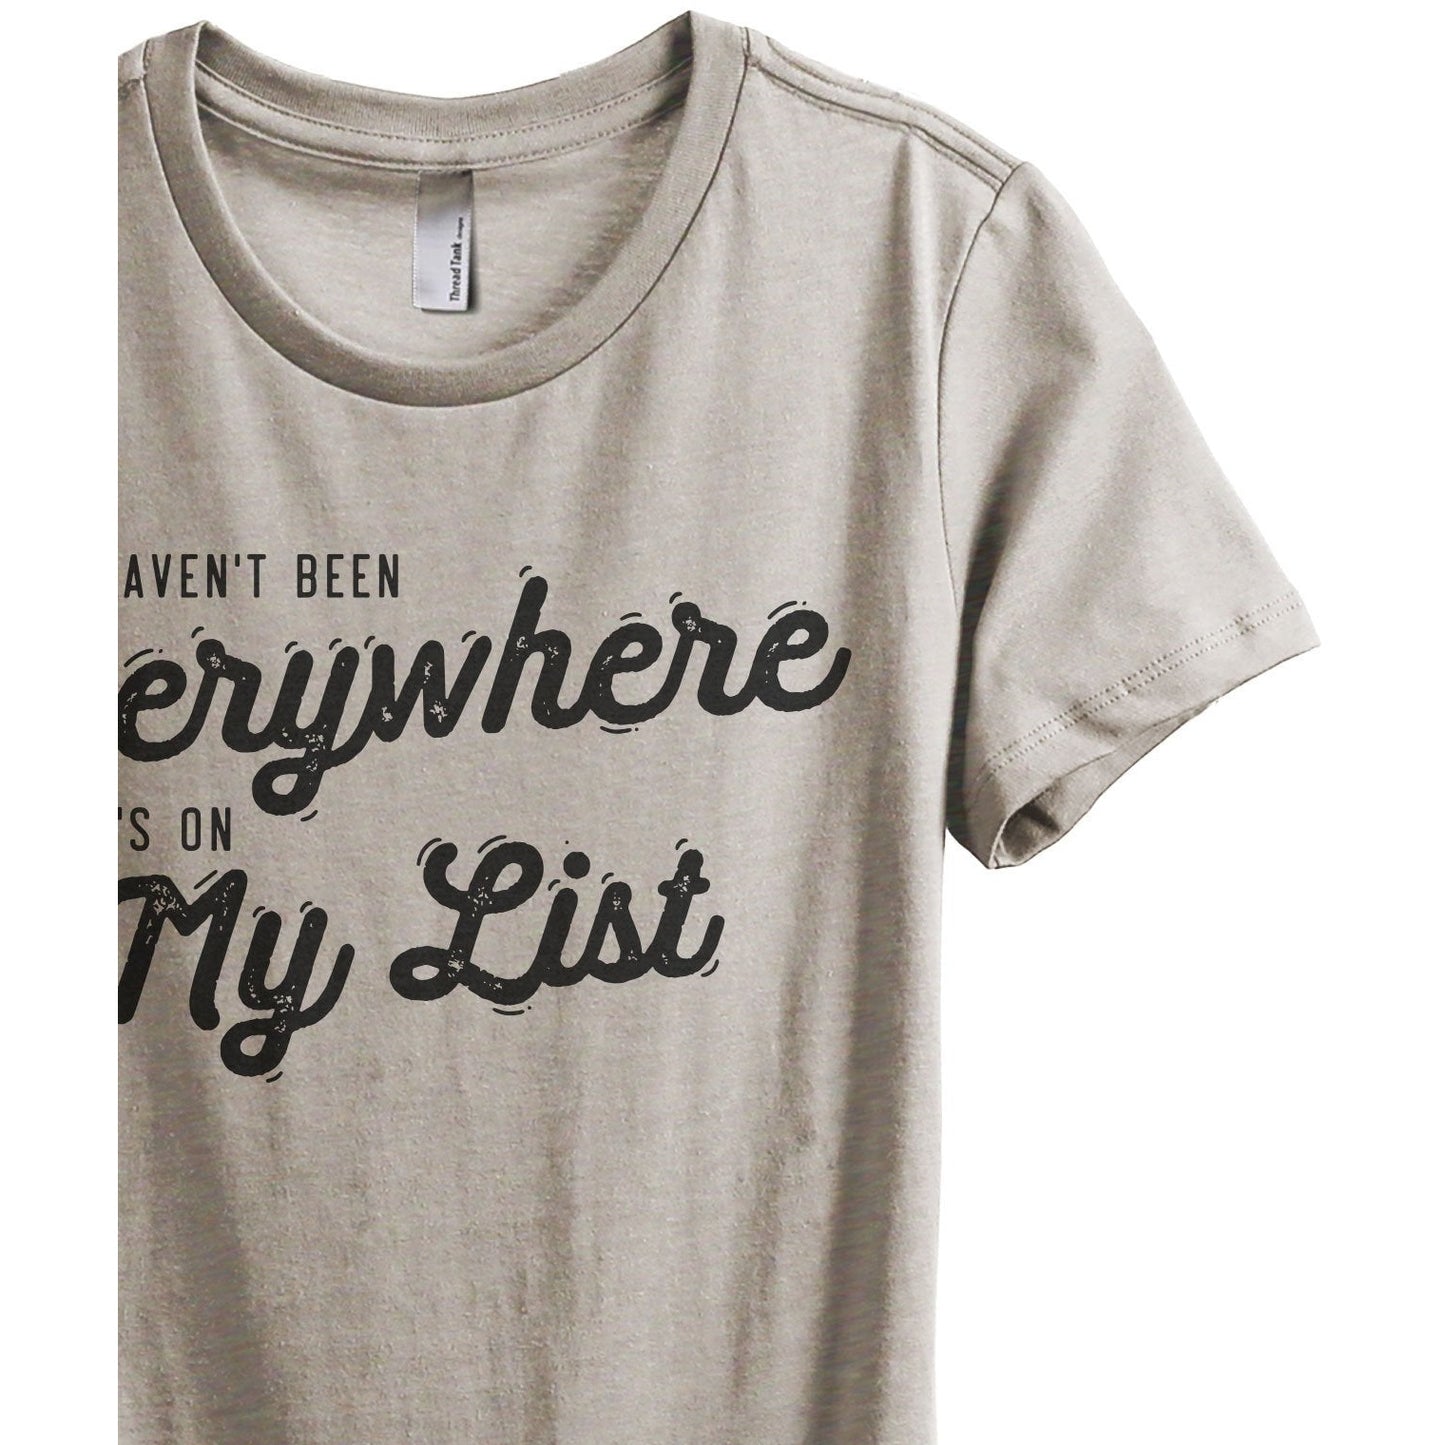 I Haven't Been Everywhere But It's On My List